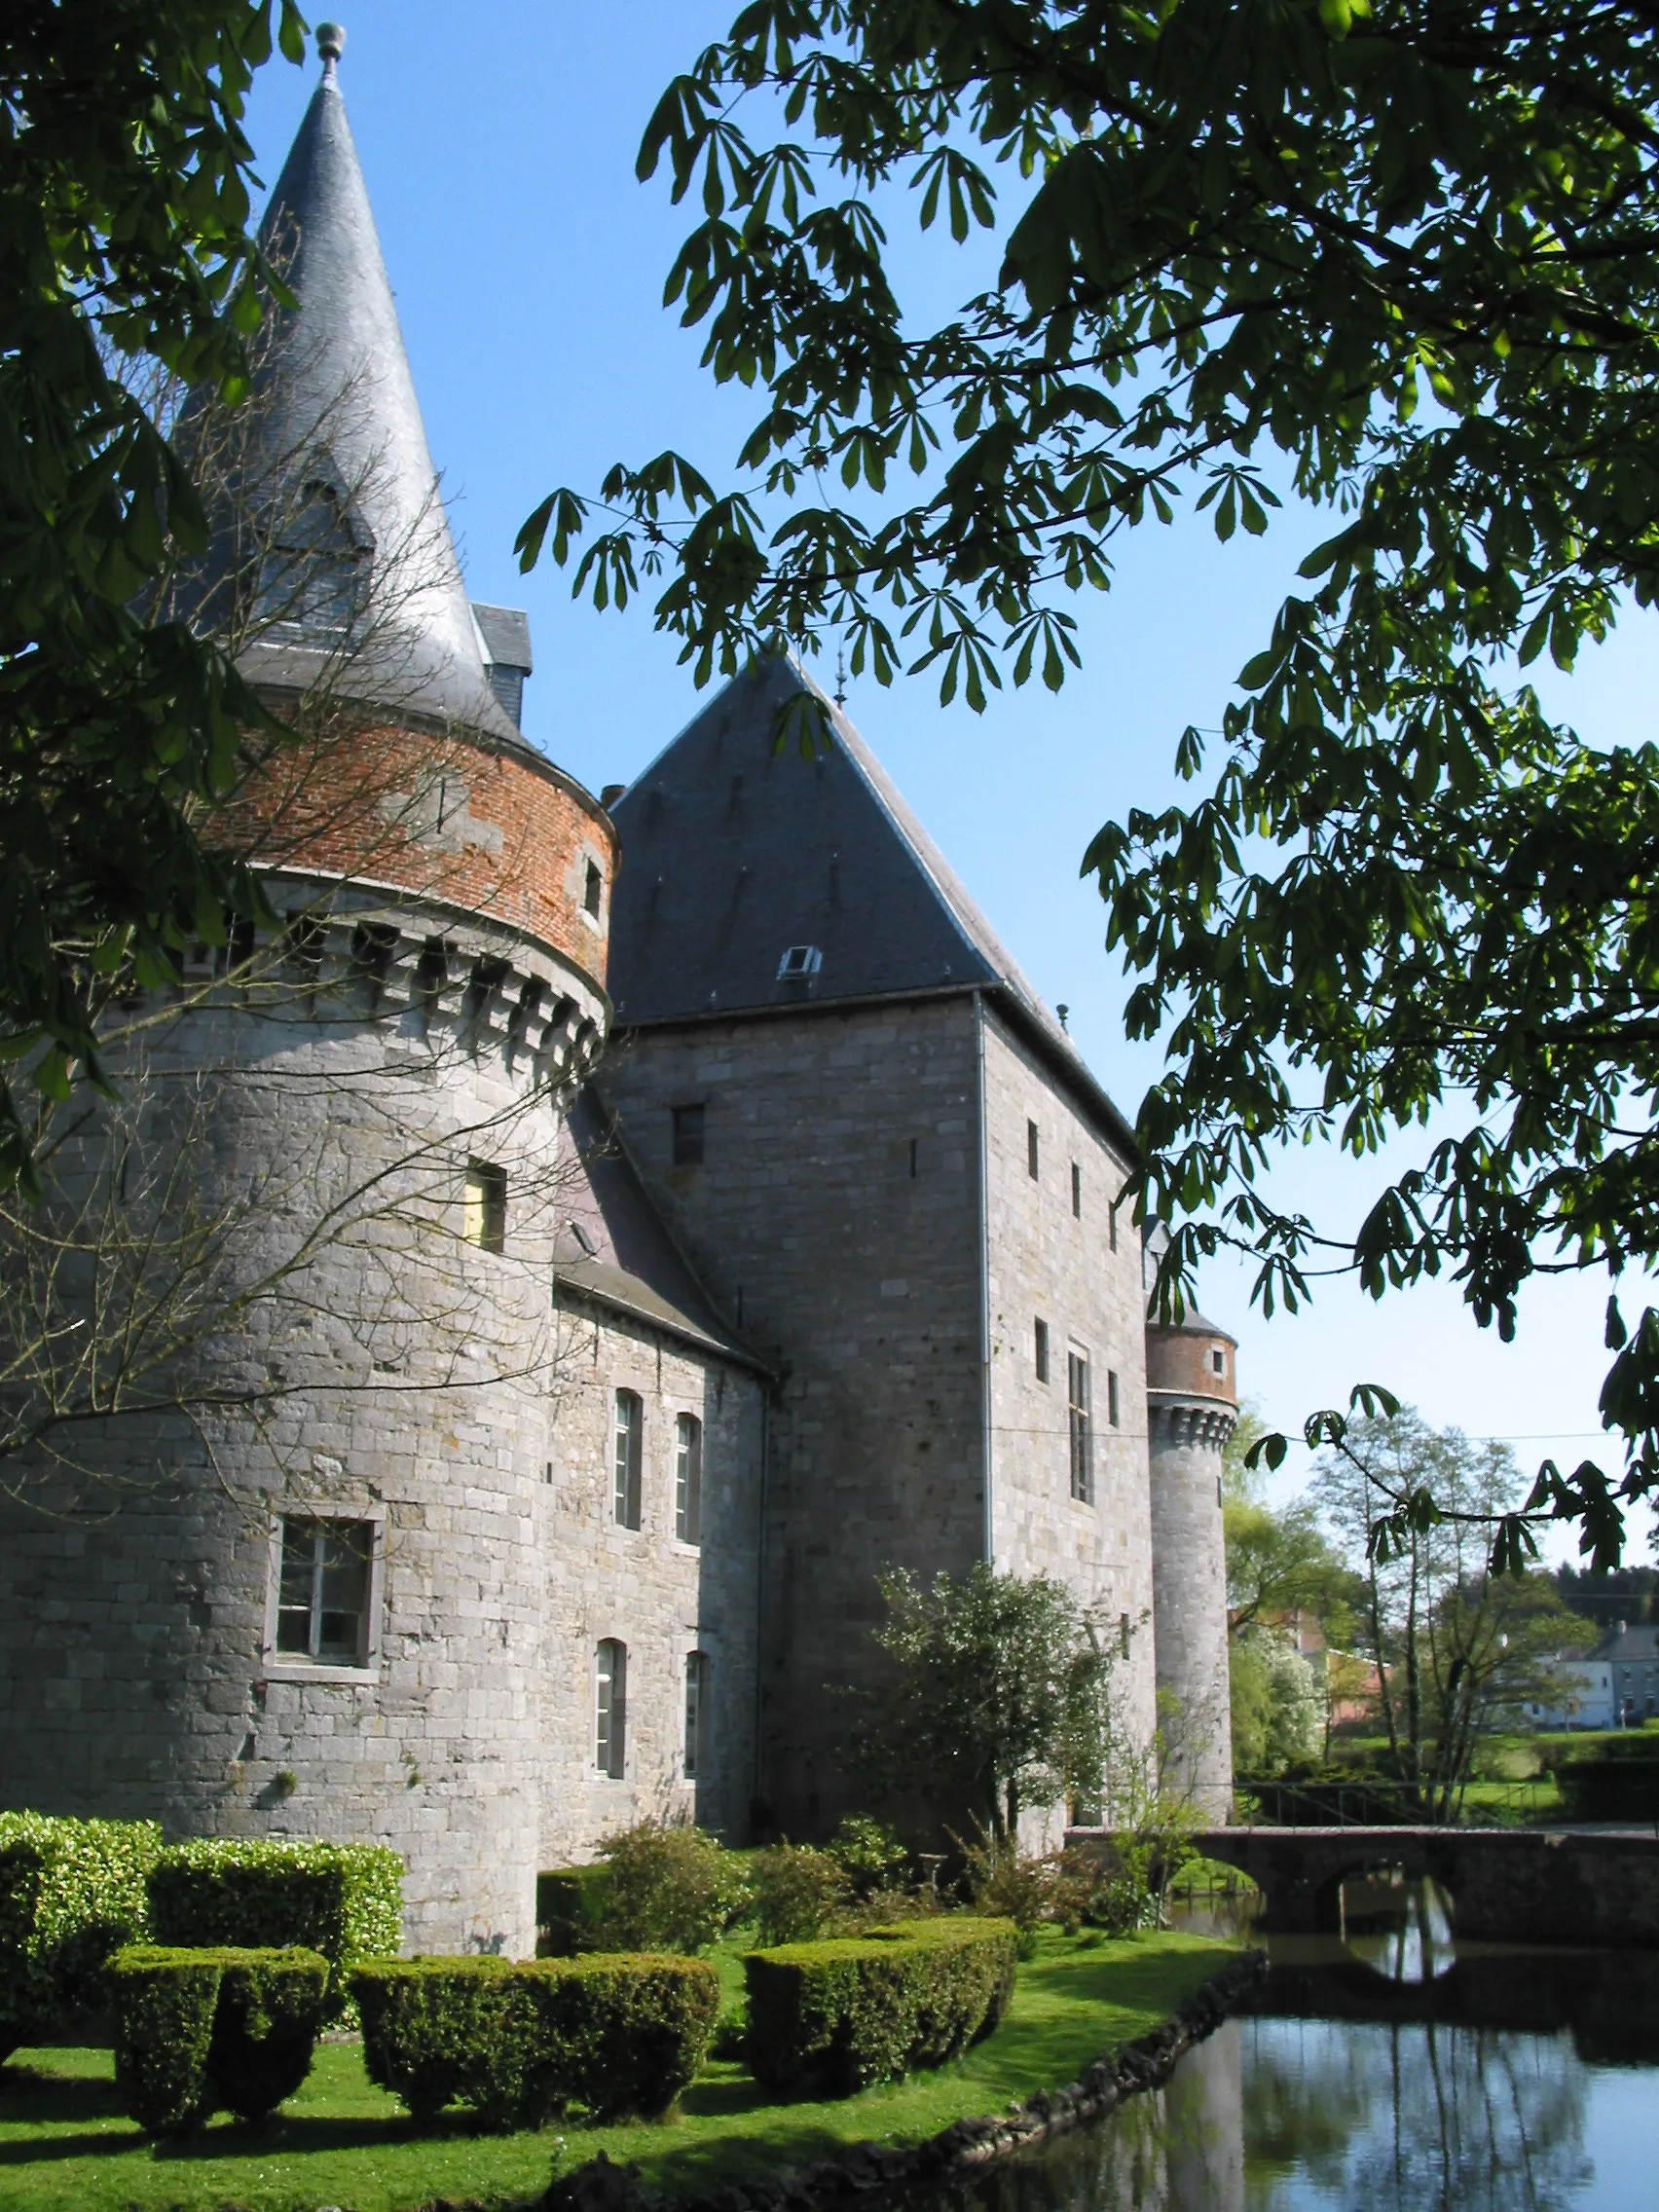 Photo showing: Solre-sur-Sambre (Belgium), the keep and the two southern towers of the castle (XIV/XVIth centuries).